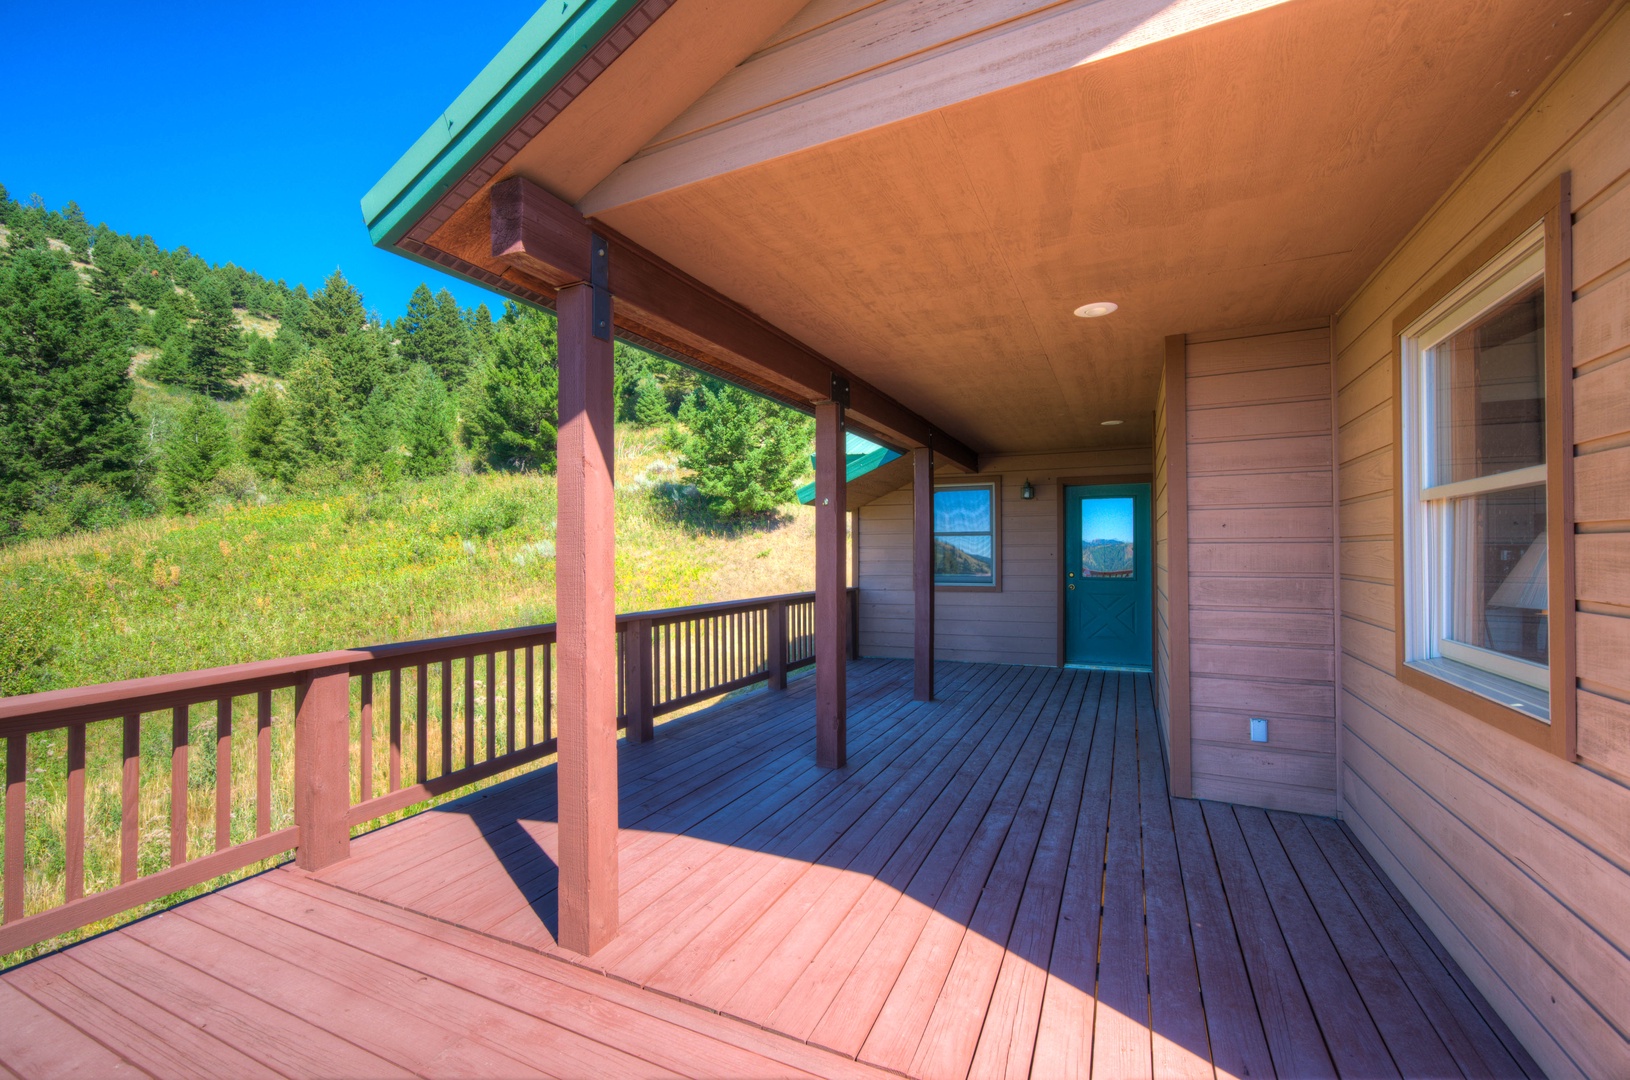 Bozeman Vacation Rentals, The Canyon Lookout - Welcome Home!